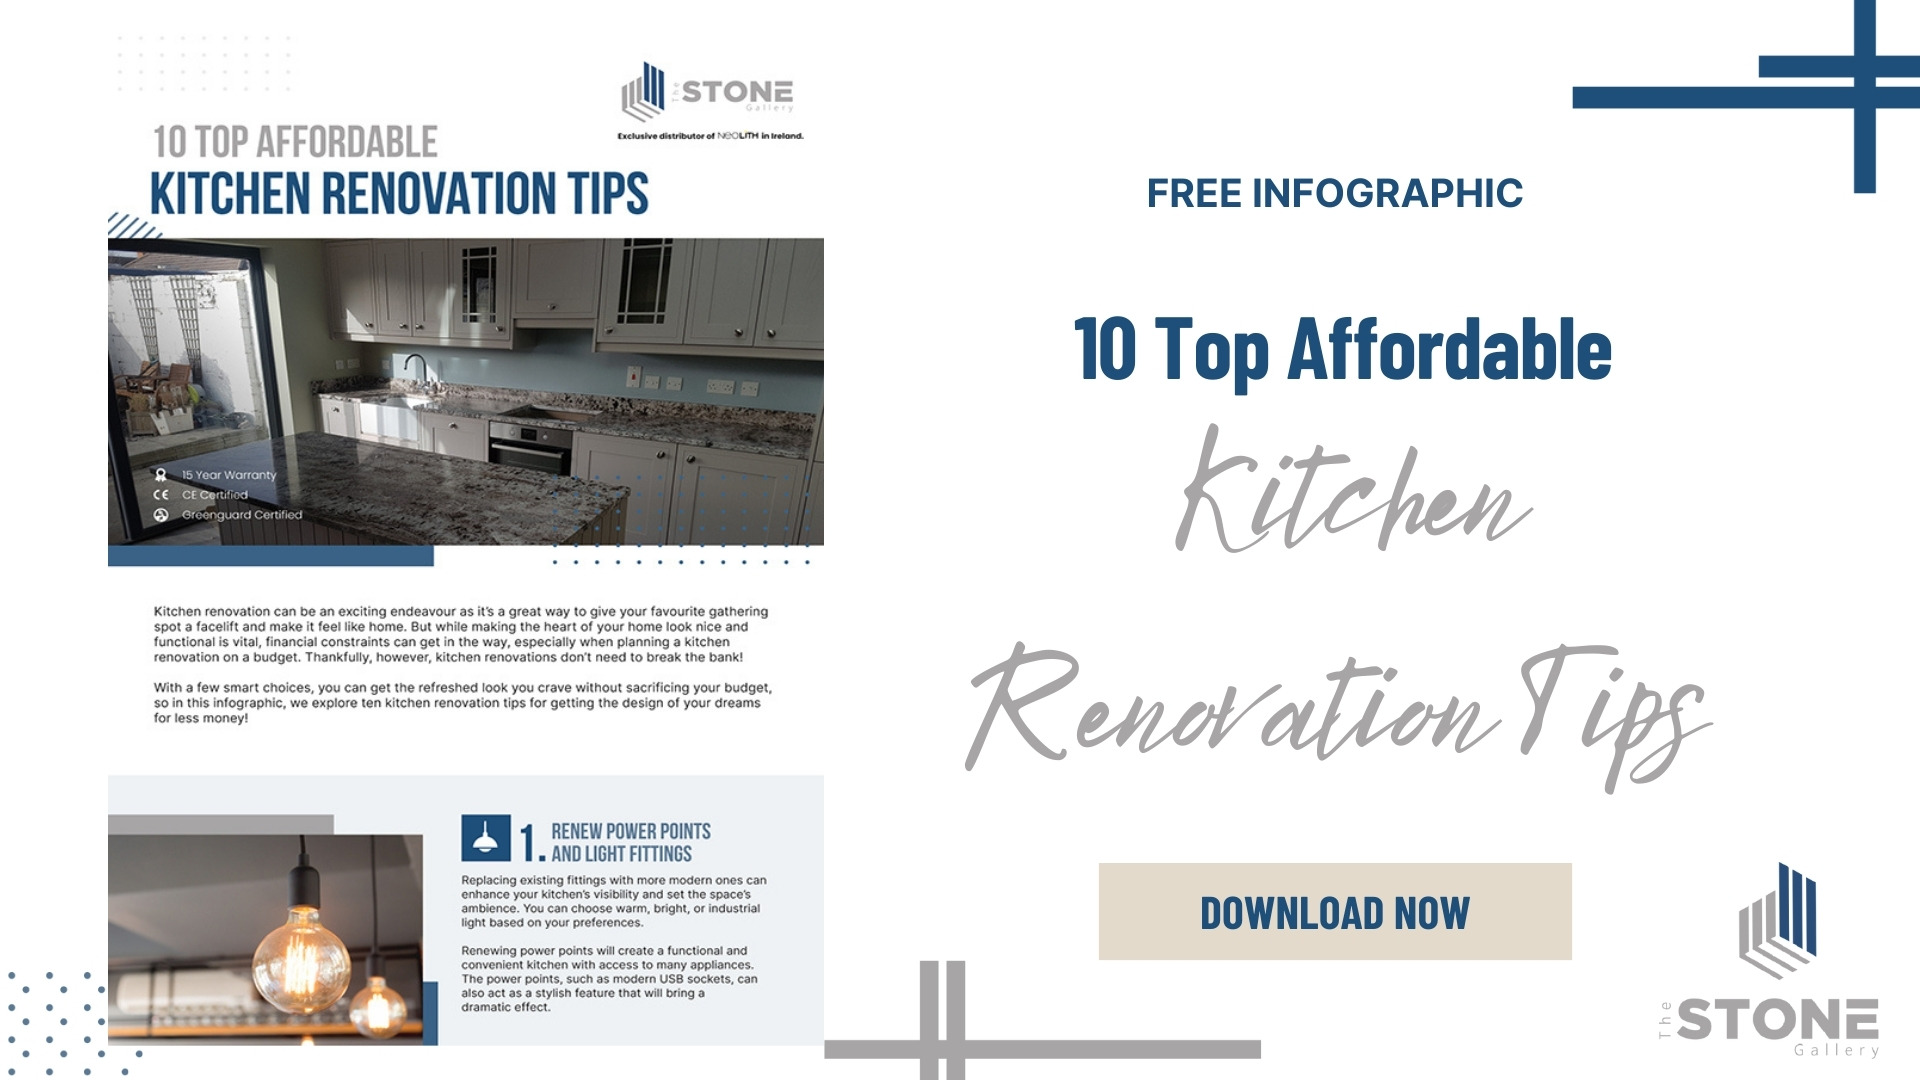 Infographic: 10 Top Affordable Kitchen Renovation Tips • The Stone Gallery